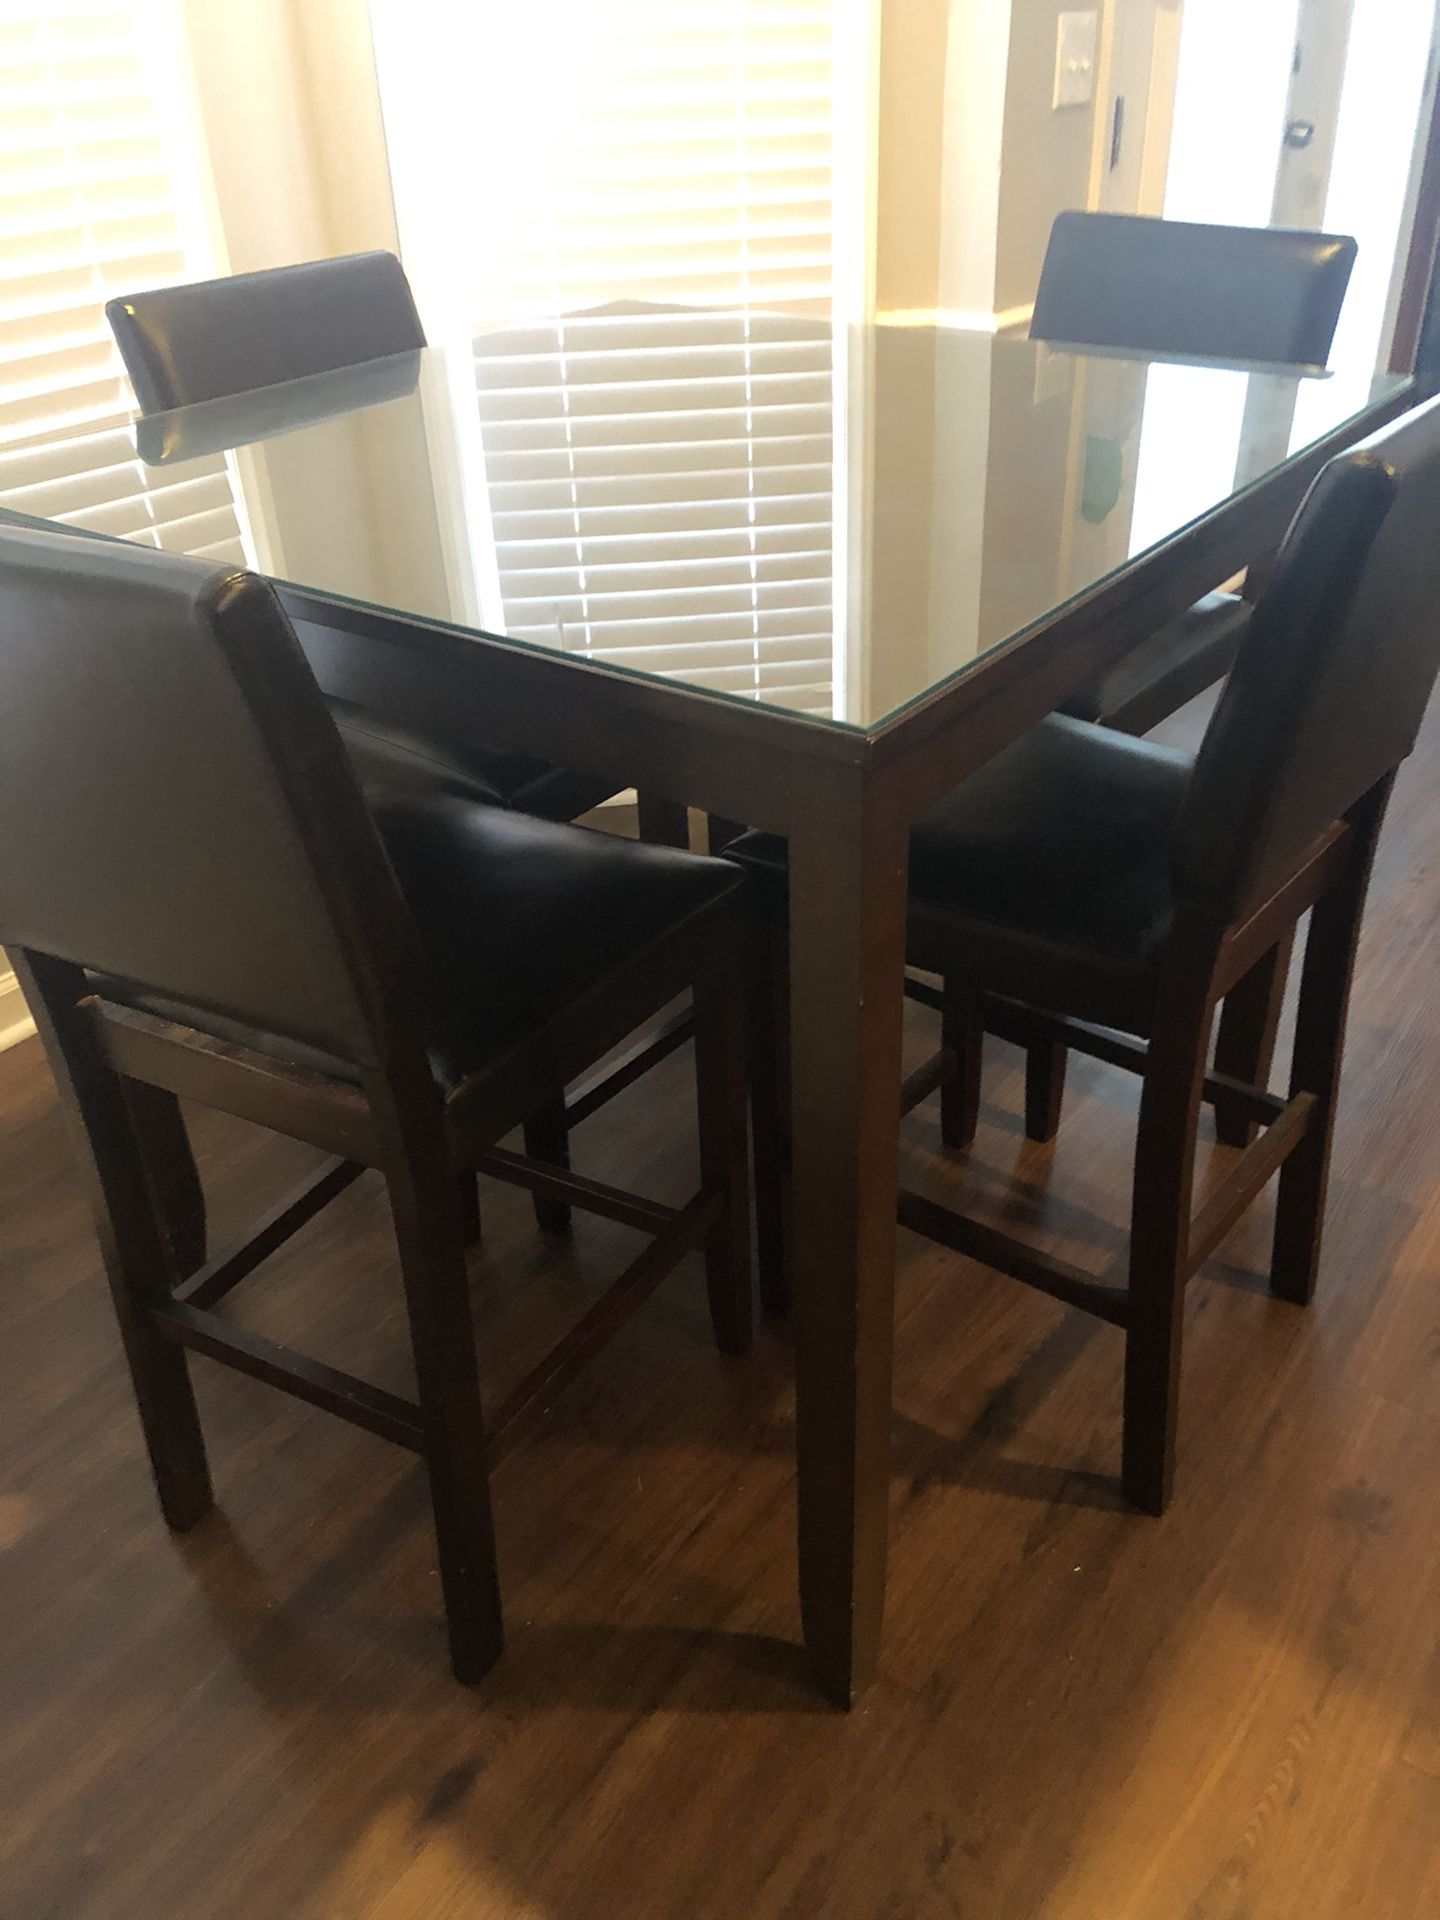 High top kitchen table and 4 chairs